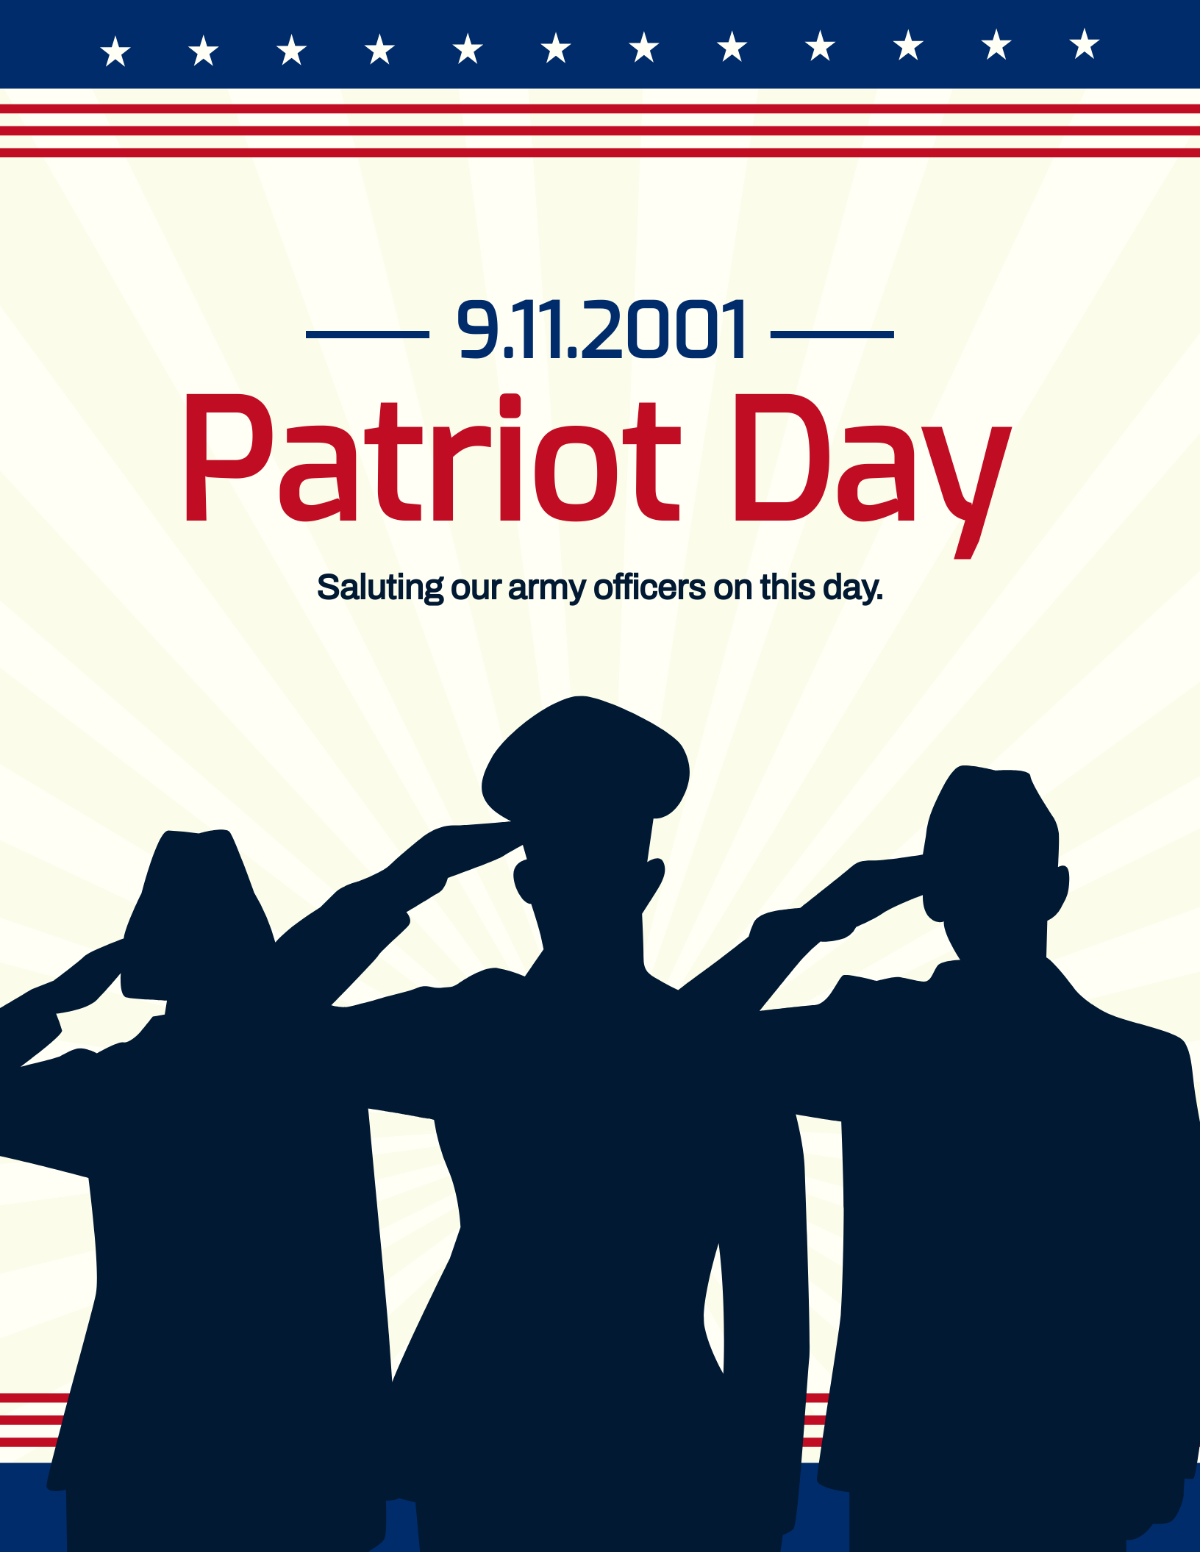 Free Patriot Day Army Flyer Template